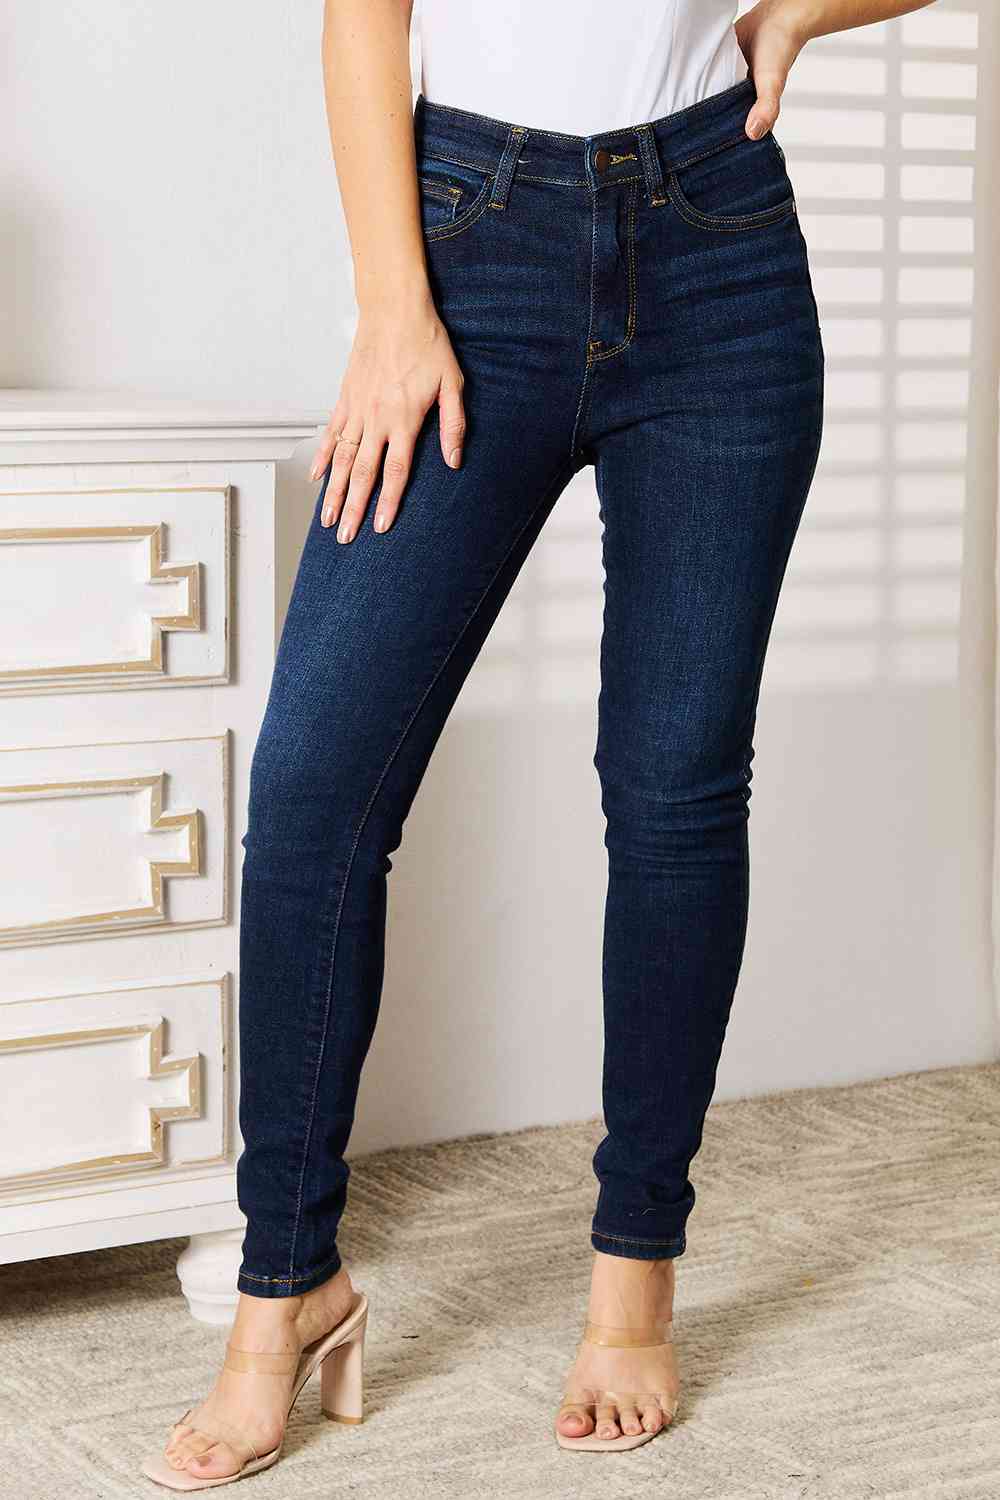 Unsettled Judy Blue Dark Skinny Jeans - Cheeky Chic Boutique